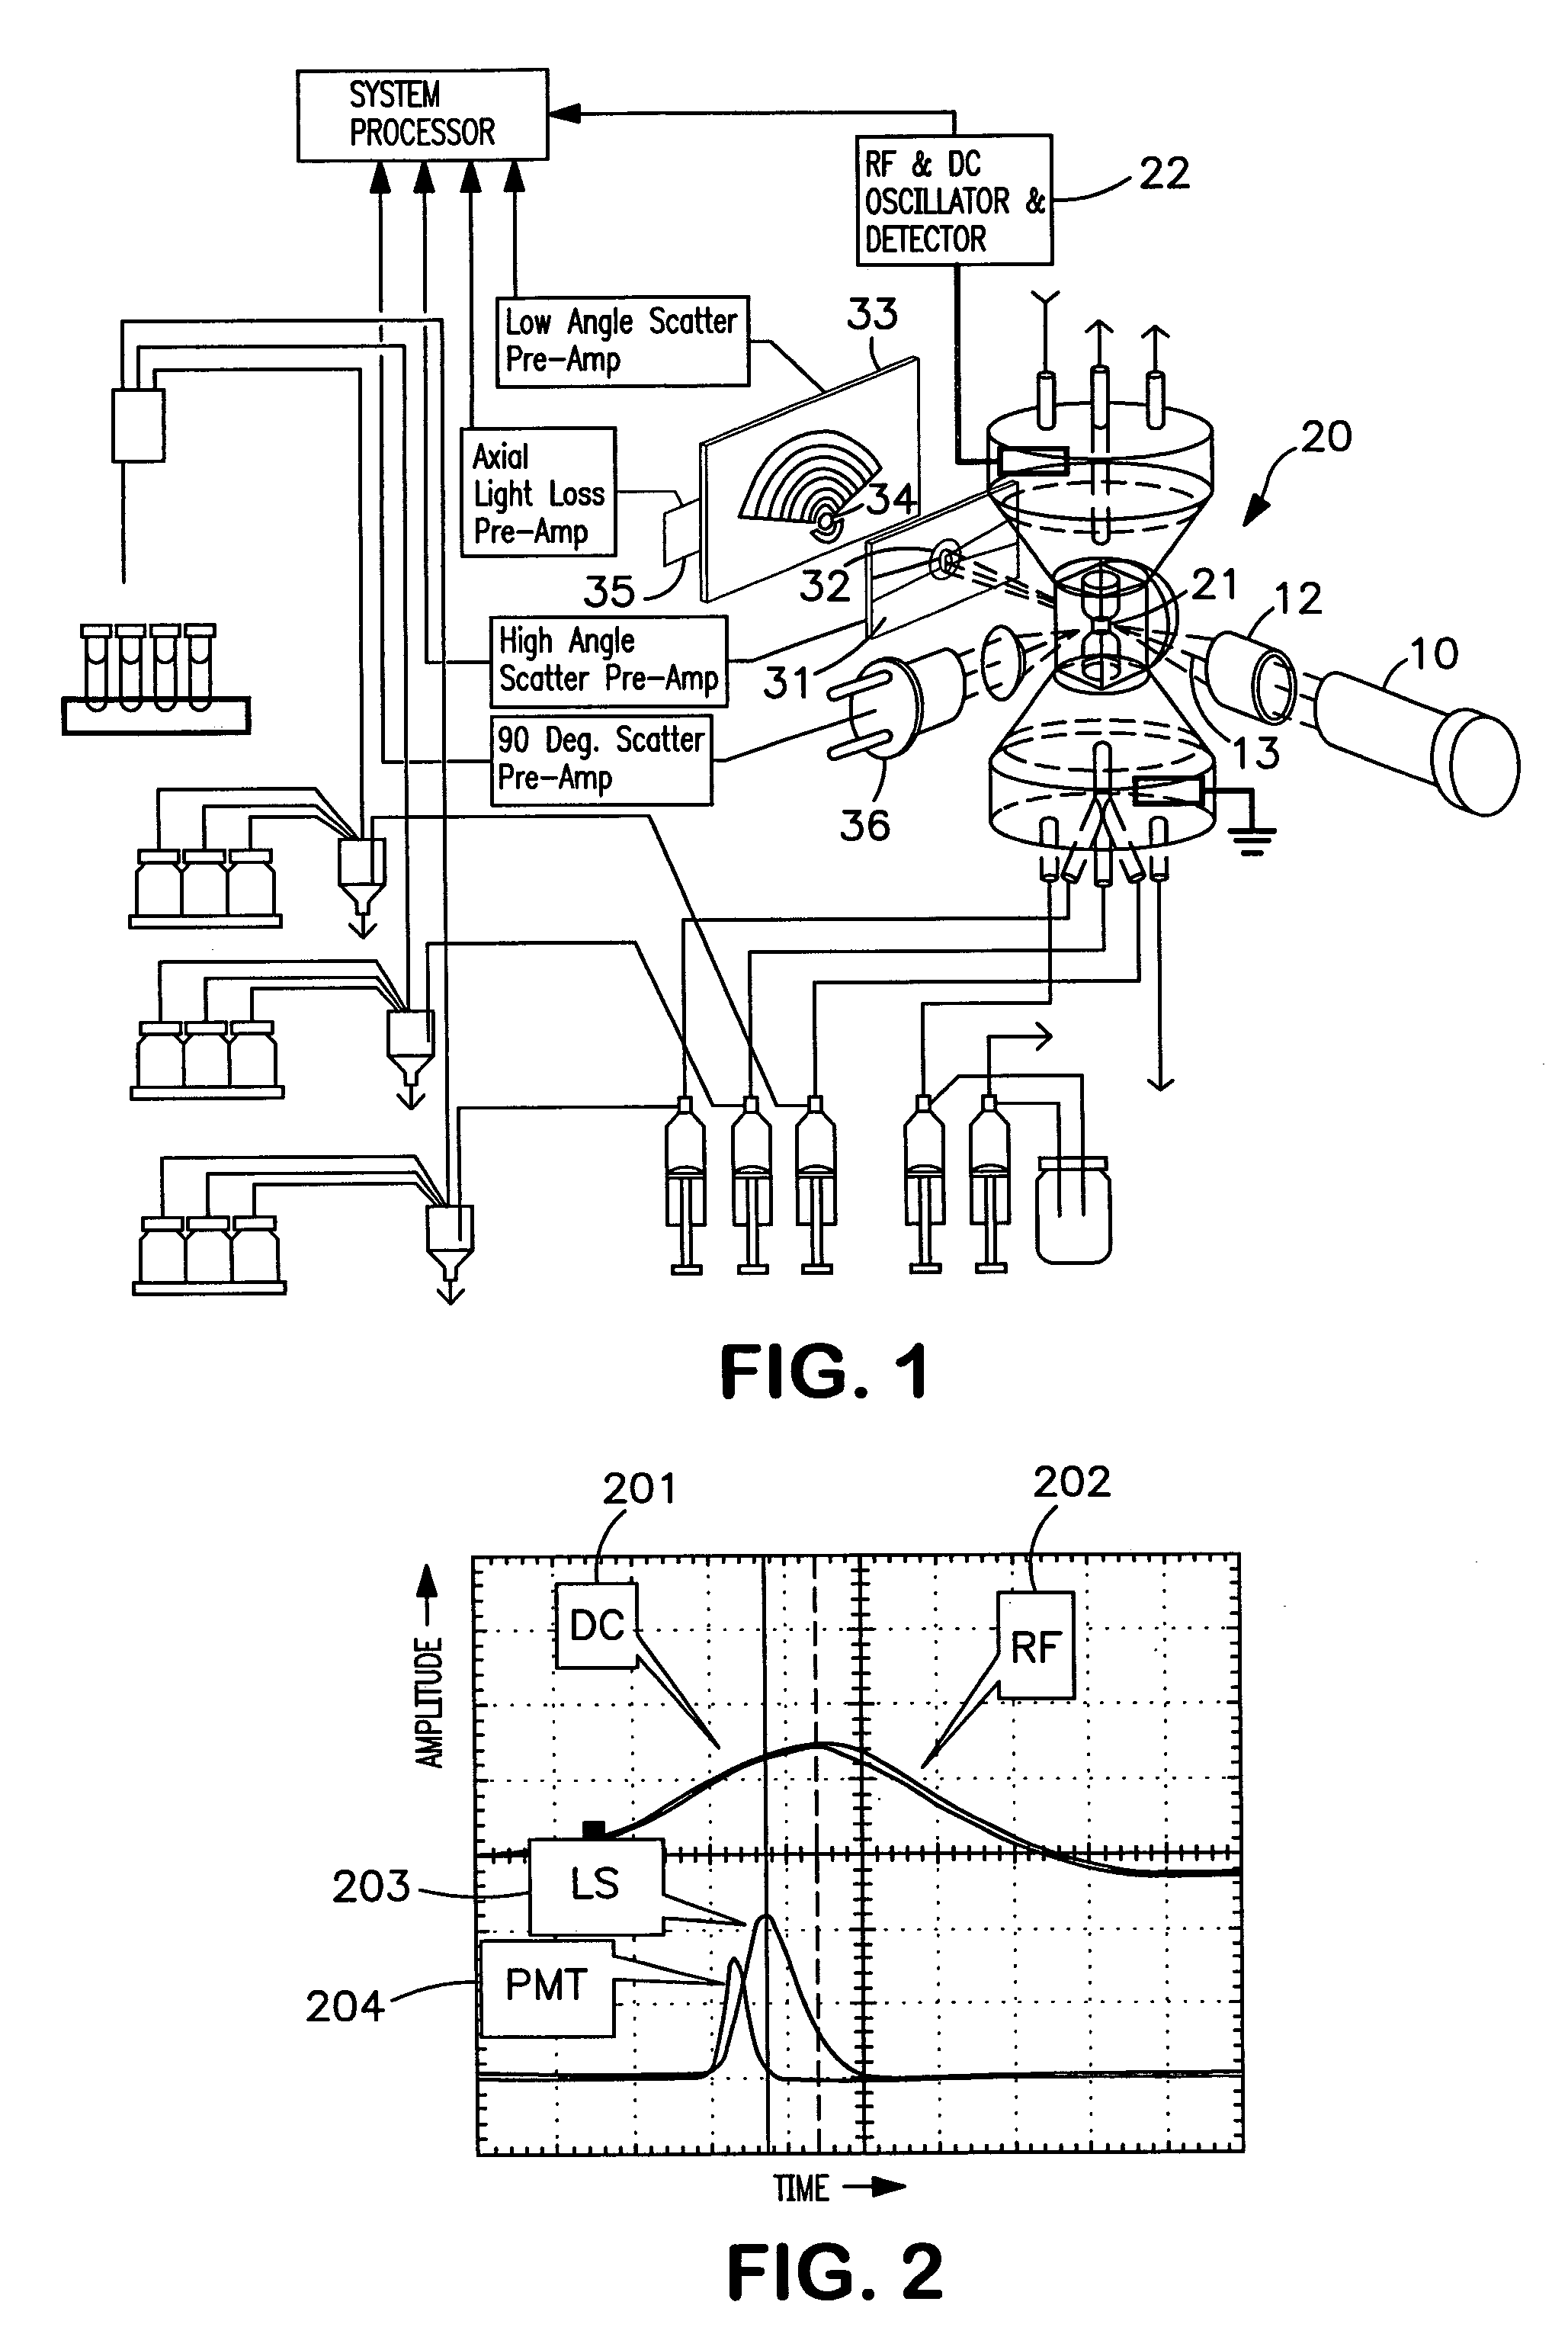 Method and apparatus for performing platelet measurement